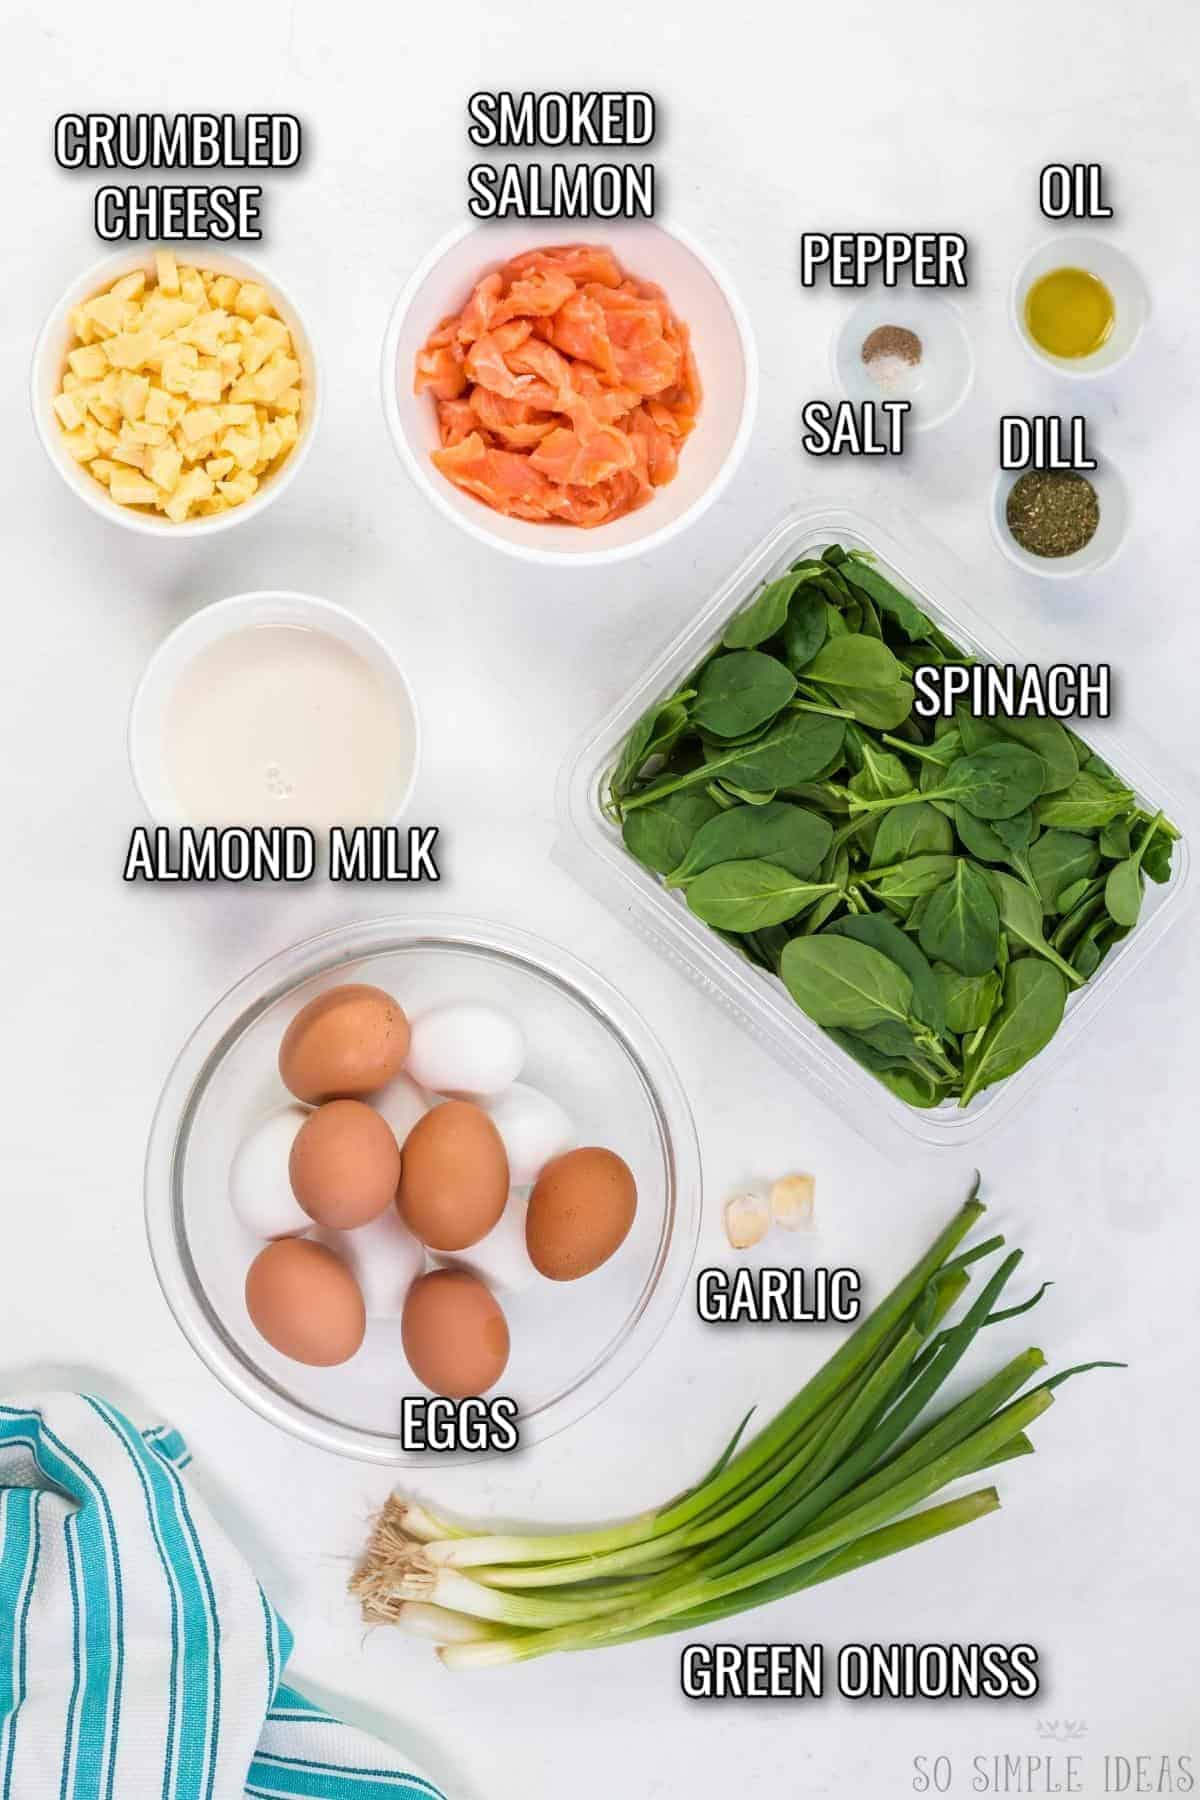 ingredients for smoked salmon frittata.